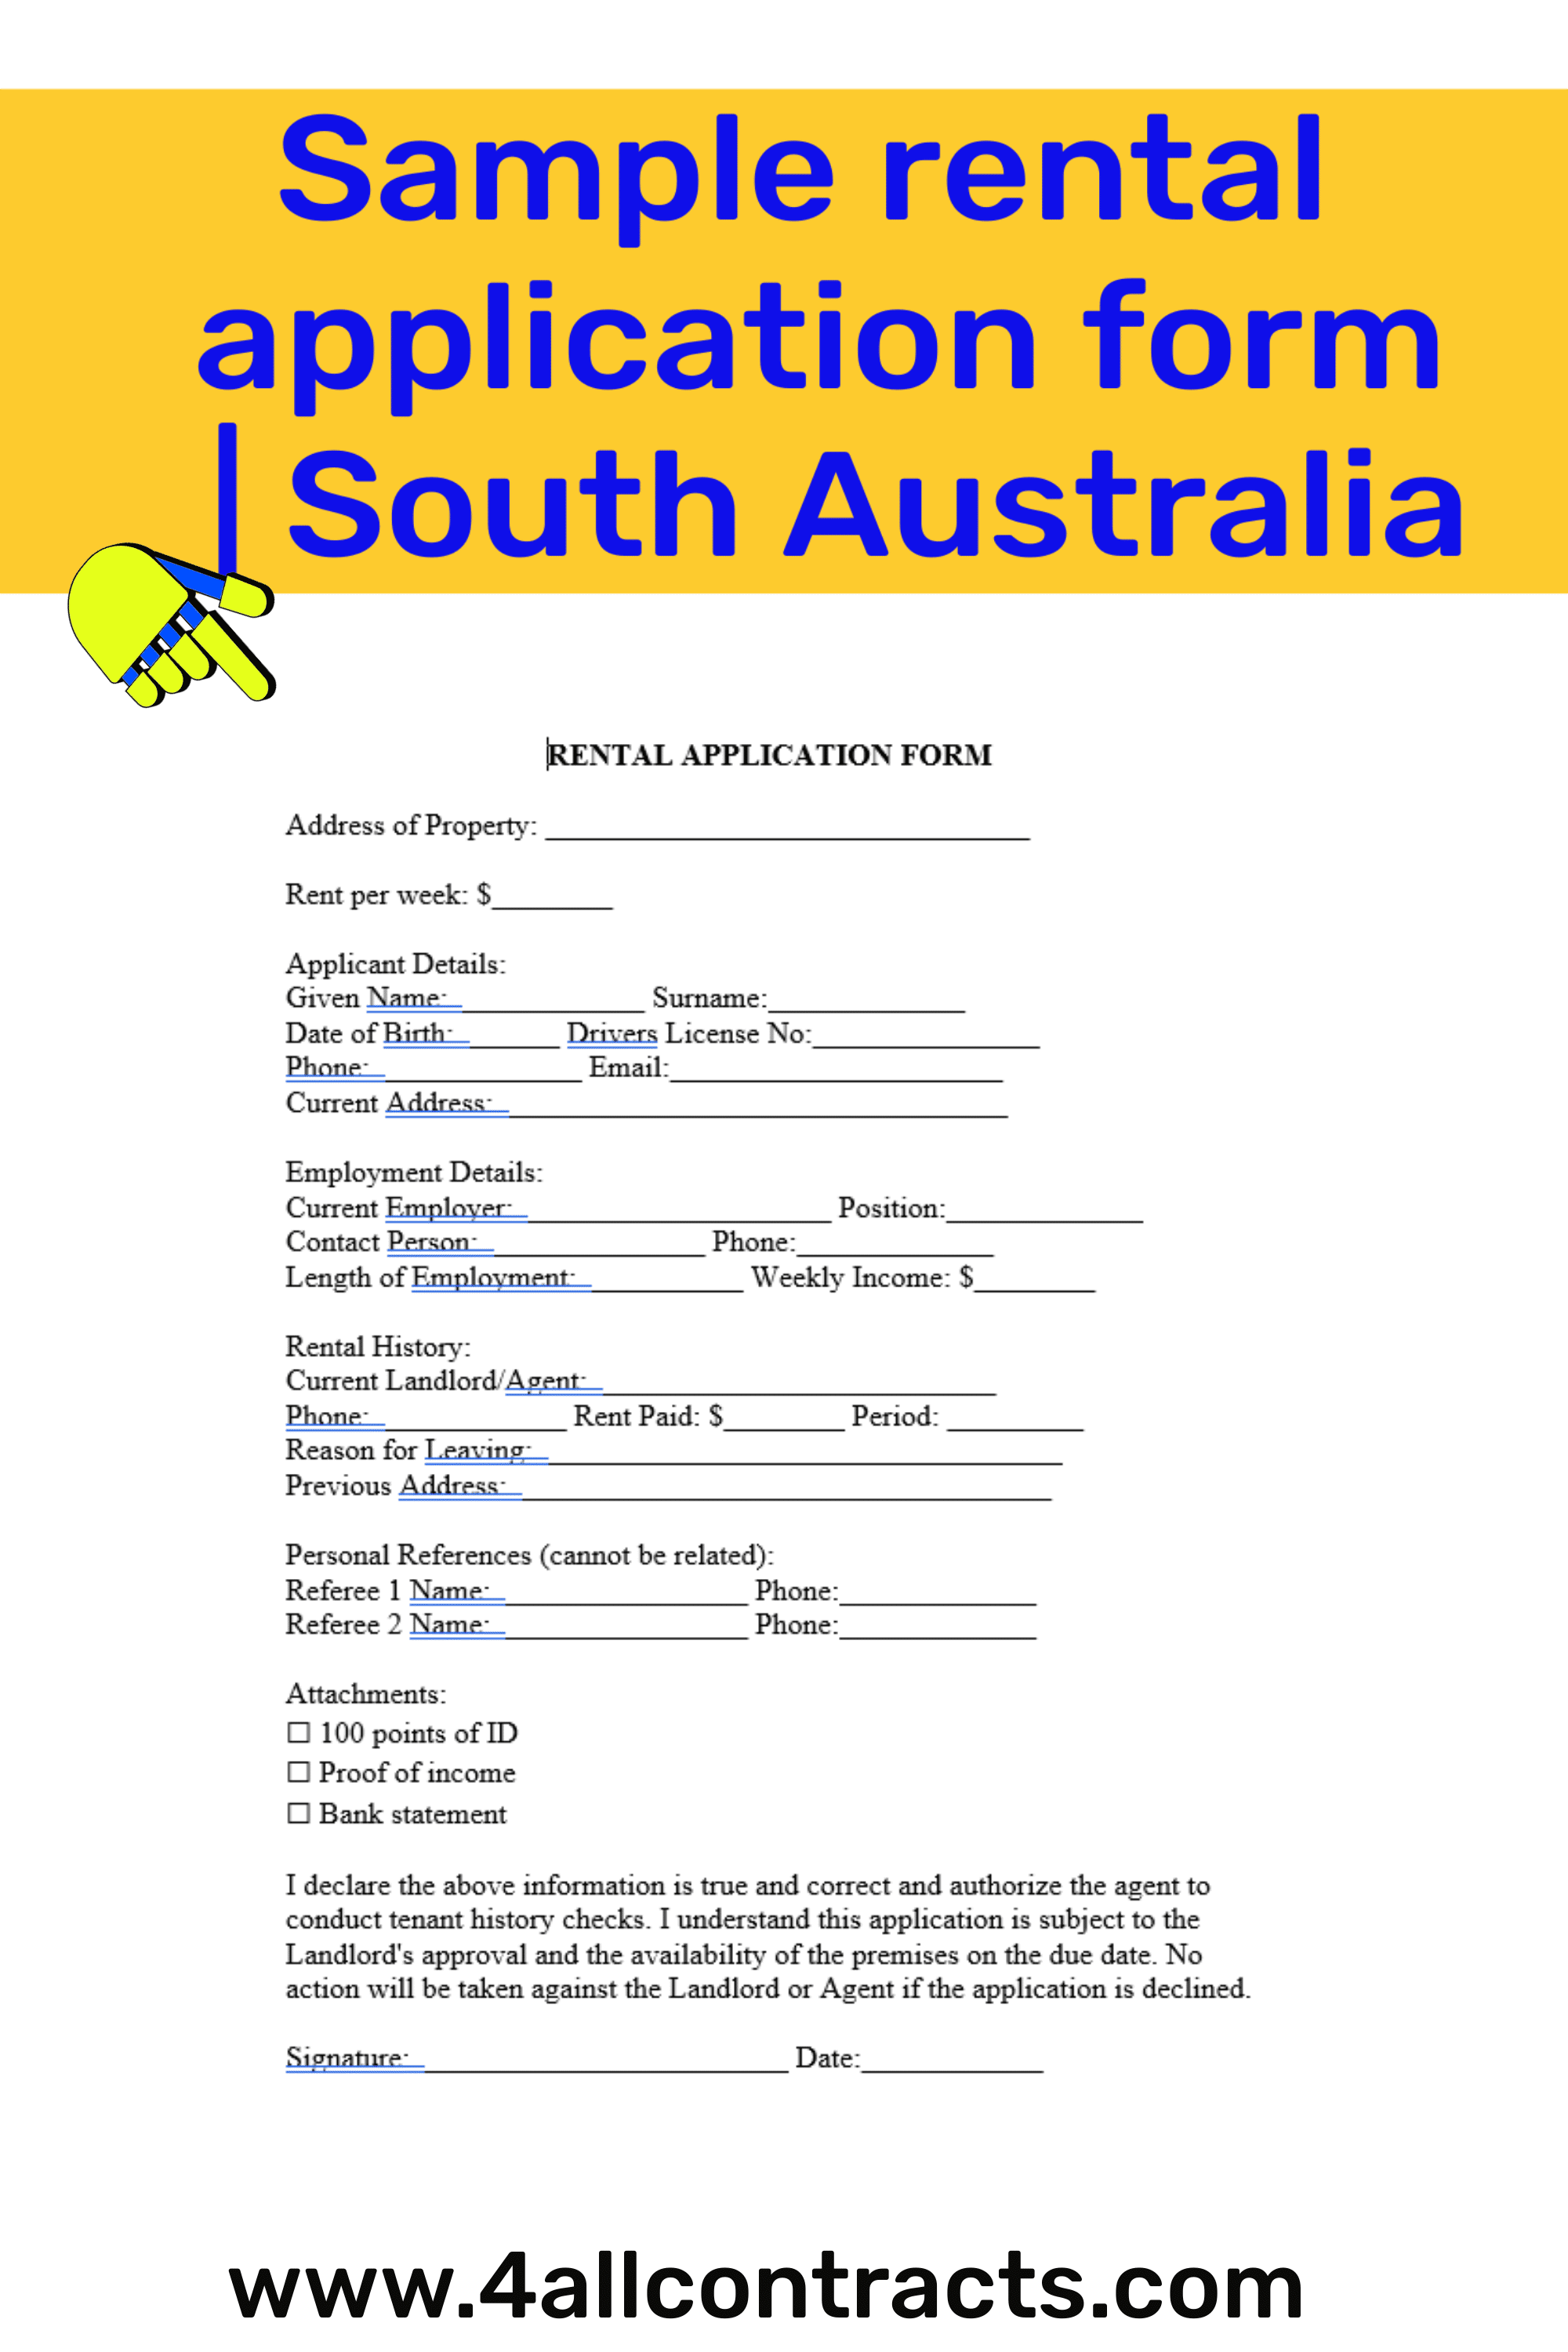 This sample rental application form template can be used by tenants applying to rent properties in South Australia. It requests key information like contact details, rental history, employment information, references, and supporting documents. Submitting a complete application with this form gives tenants the best chance of approval by landlords and property managers in SA.